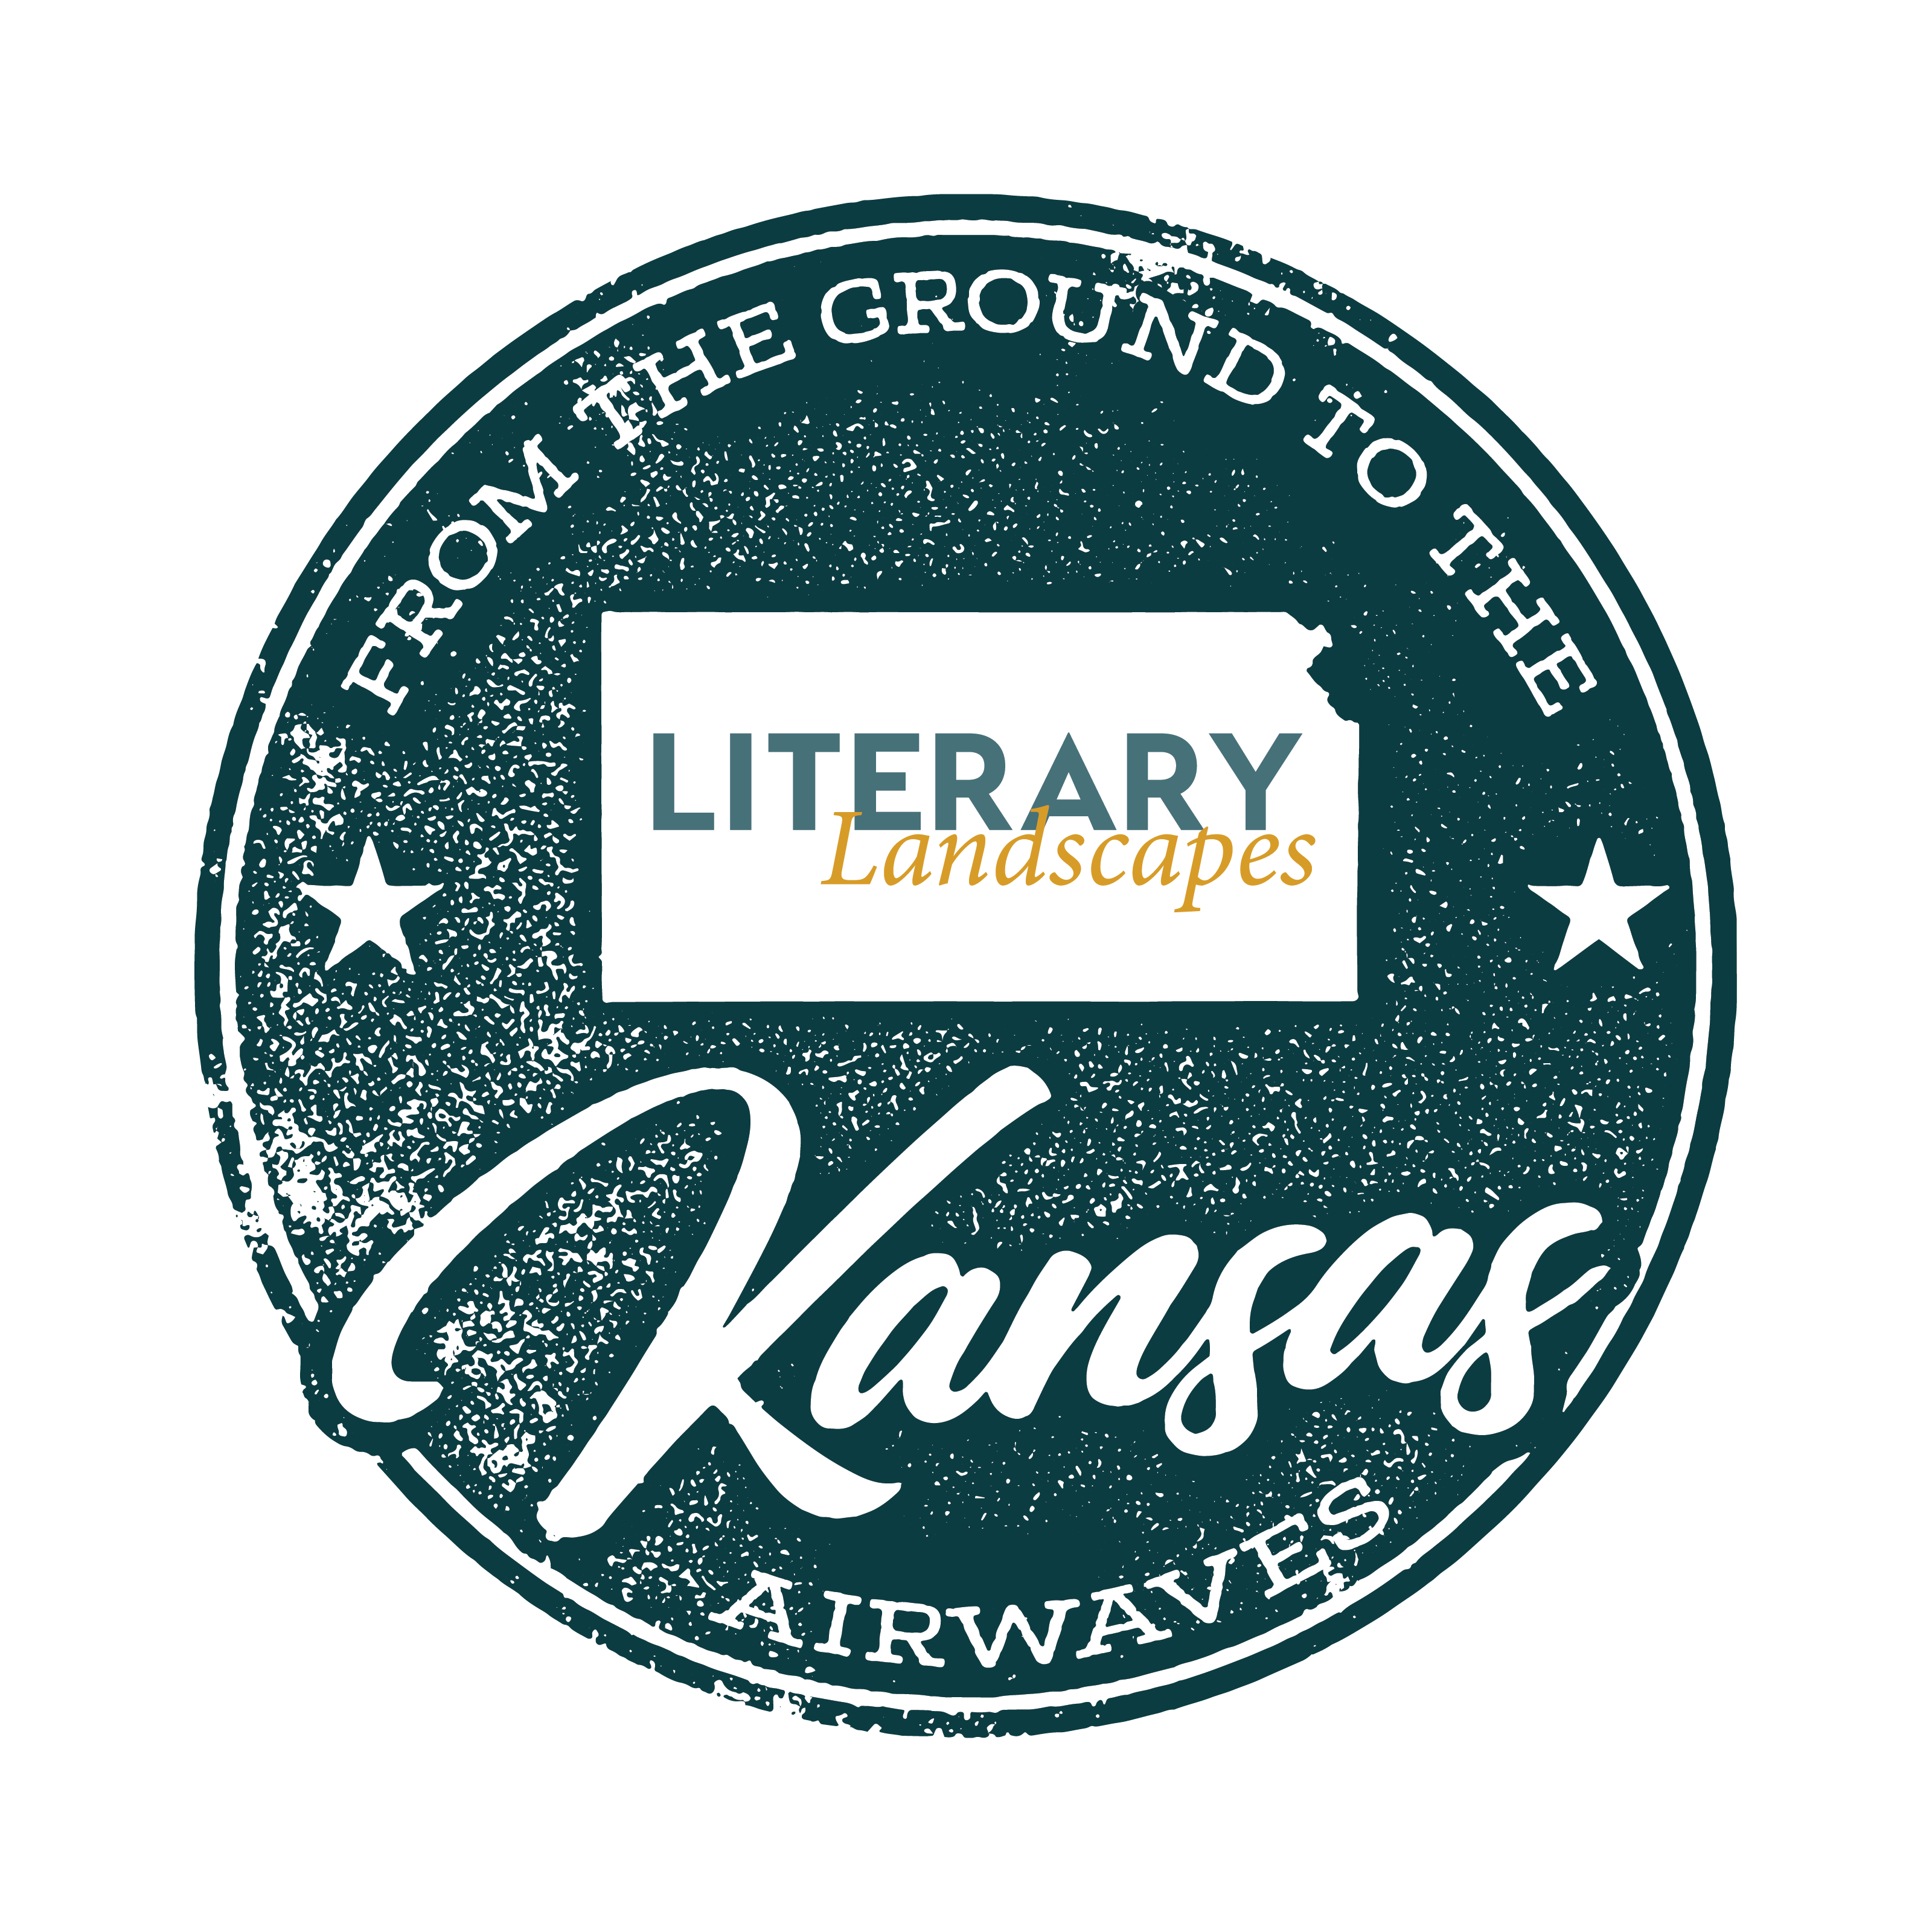 a blue stamp that says Kansas: from the ground to the airwaves; with the shape of Kansas and "Literary Landscapes" in the middle